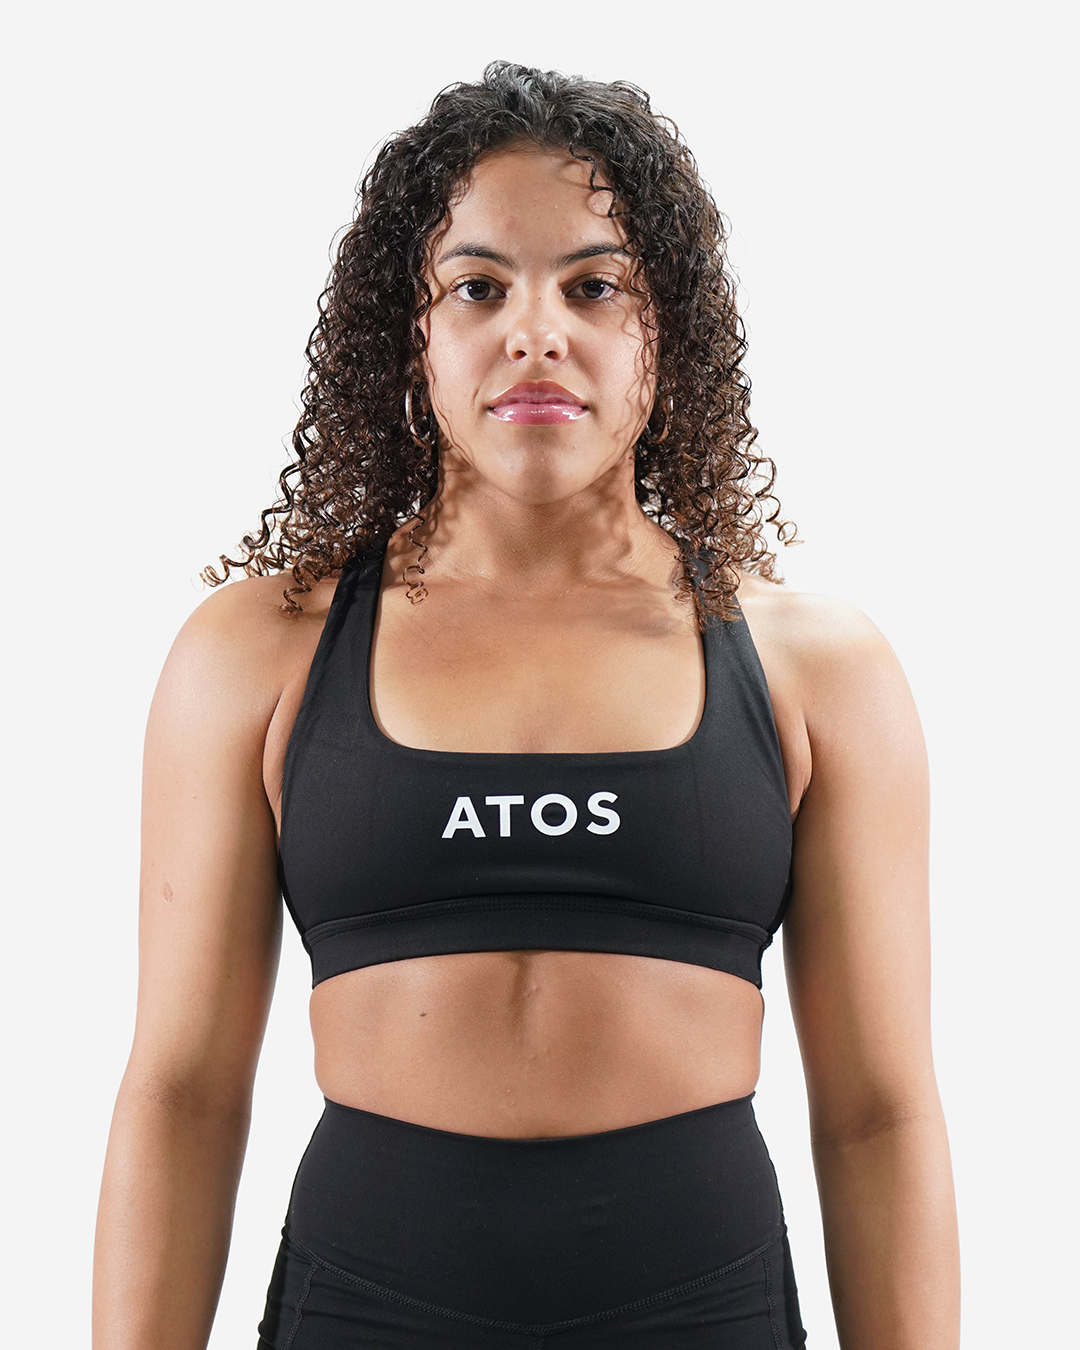  Women's Sports Bras - H / Women's Sports Bras / Women's Bras:  Clothing, Shoes & Jewelry